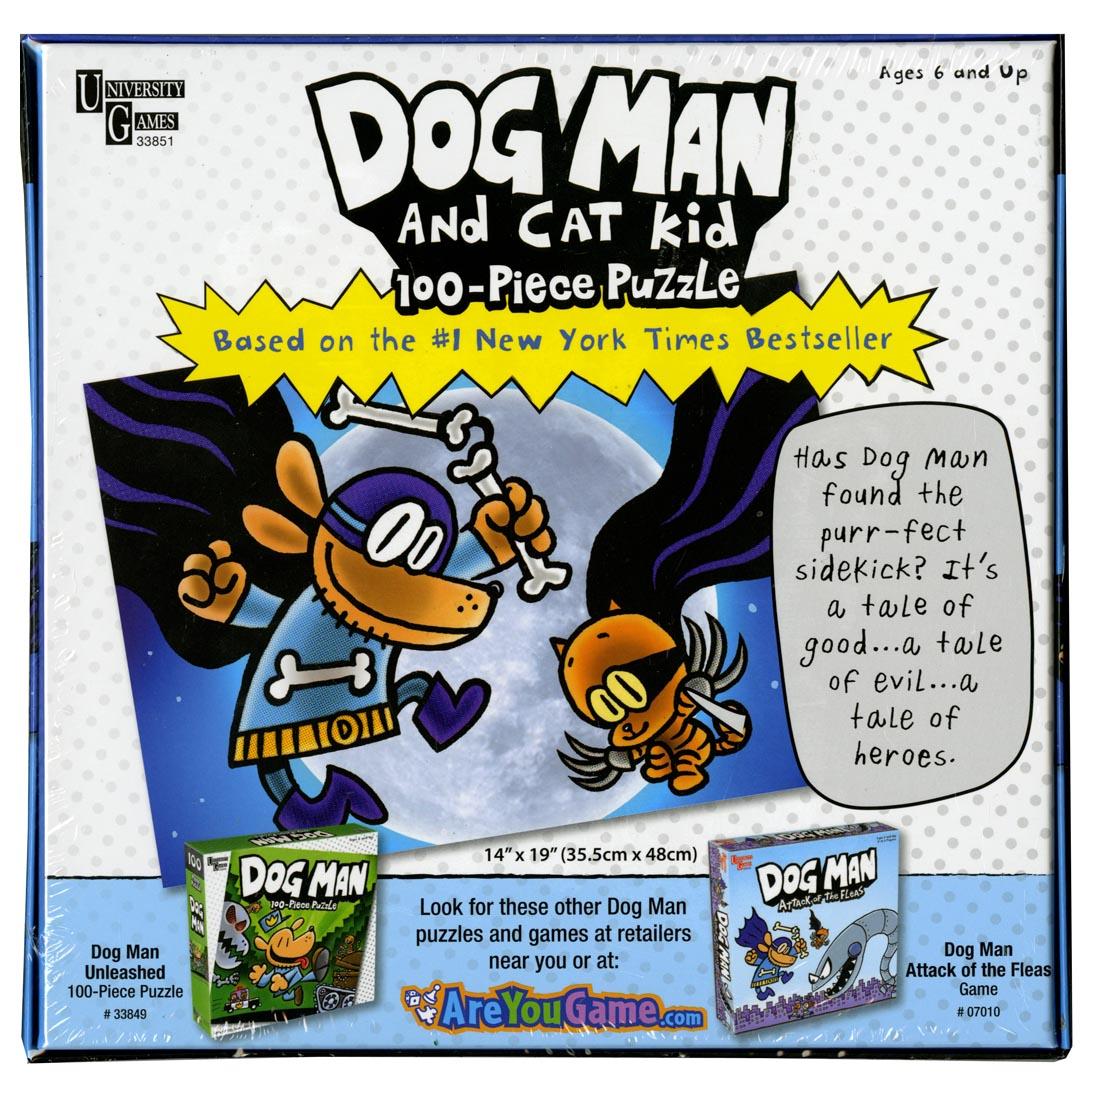 Back of box of the Dog Man & Cat Kid 100-Piece Puzzle by University Games